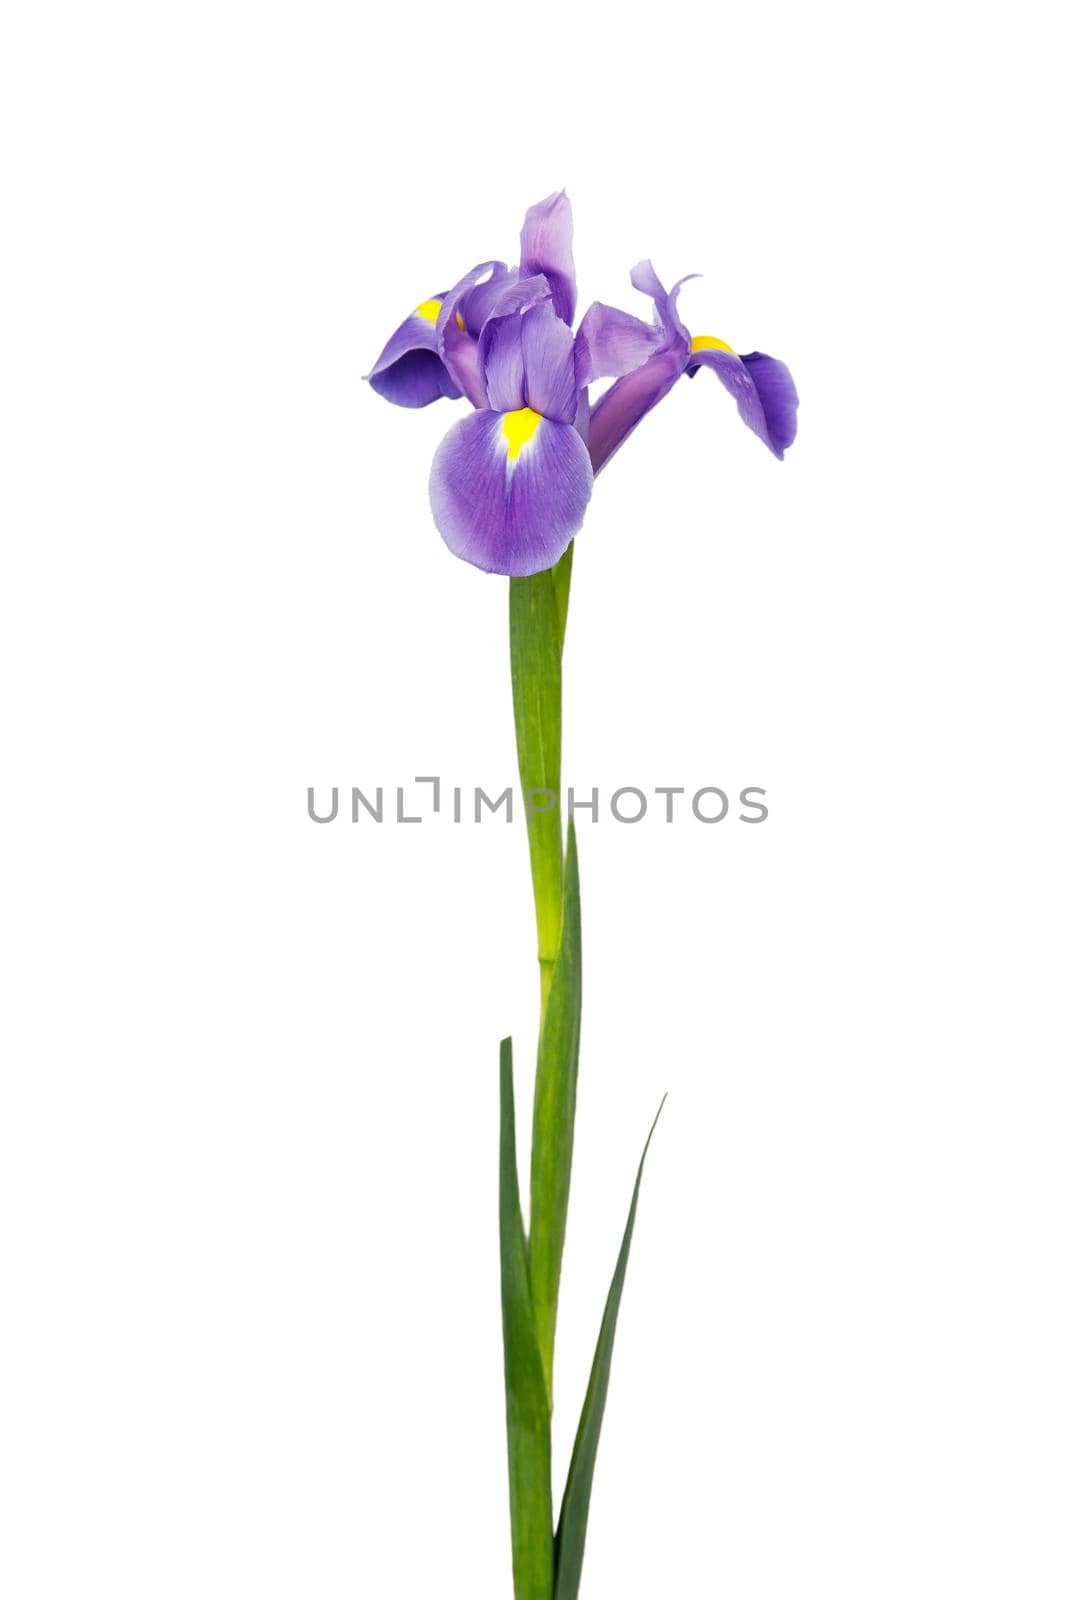 Violet Irises xiphium (Bulbous iris, sibirica) on white background with space for text. Top view, flat lay. Holiday greeting card for Valentine's Day, Woman's Day, Mother's Day, Easter! by elenarostunova